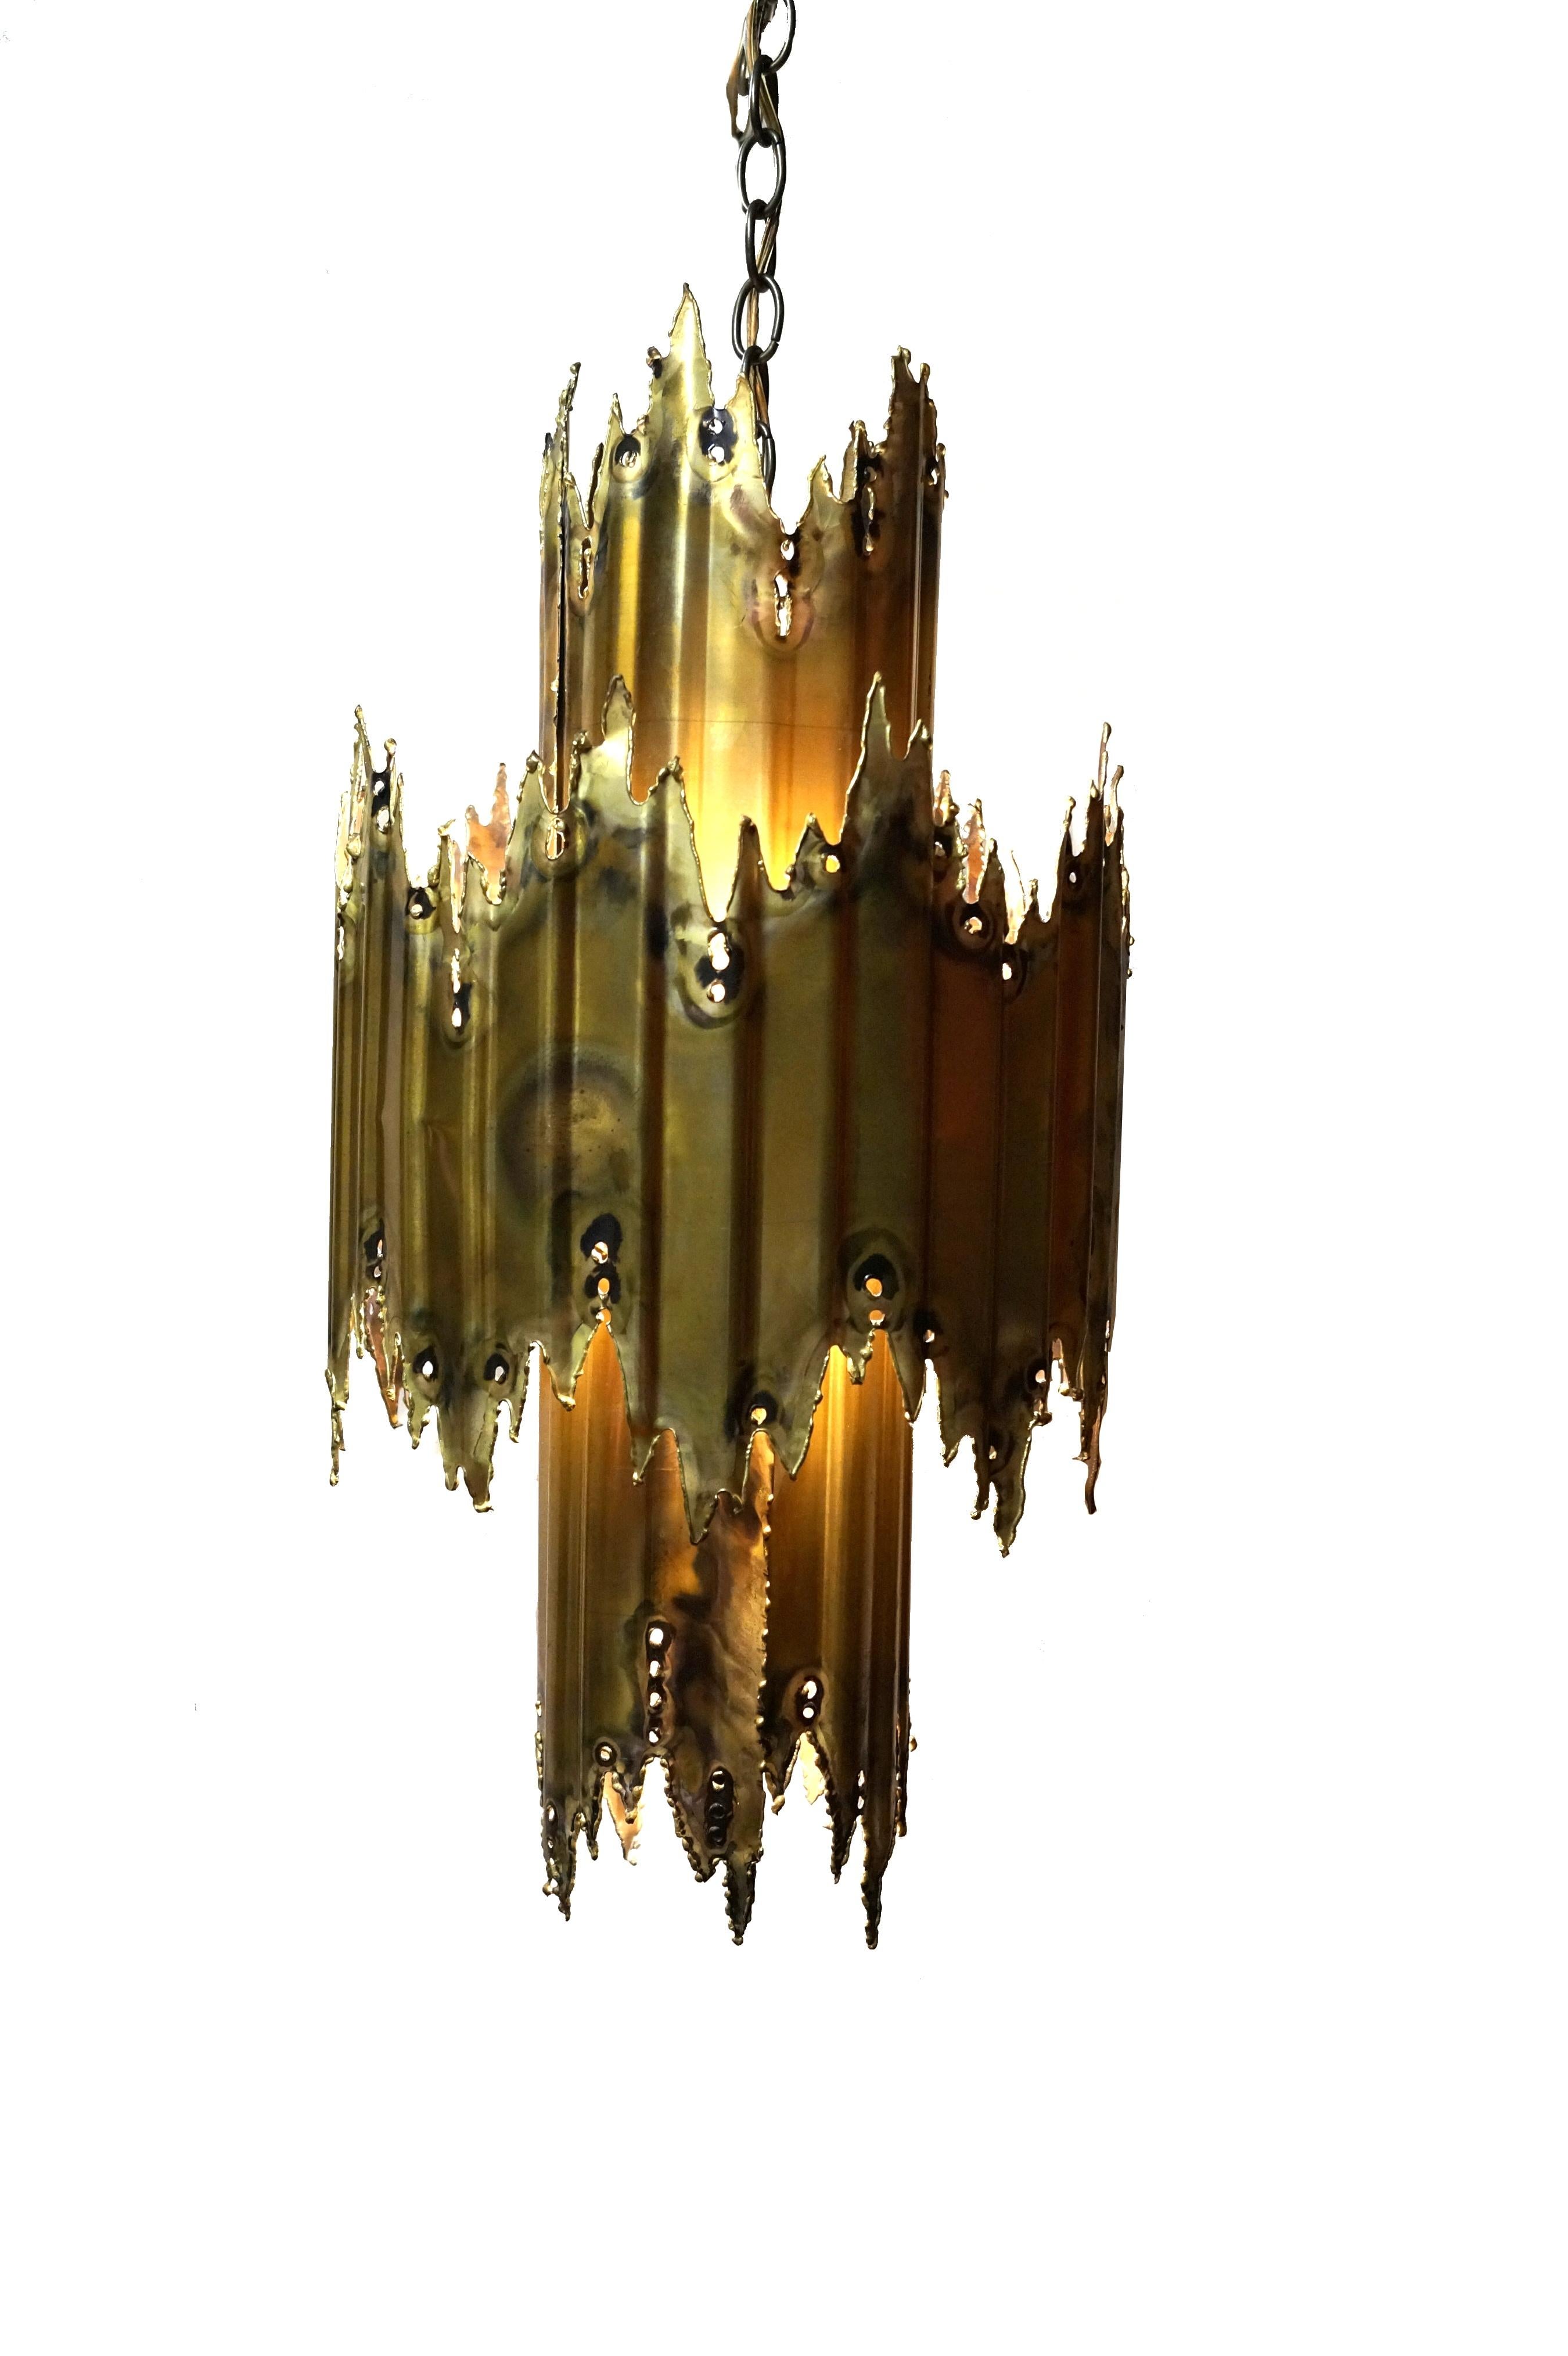 Brutalist Swag Pendant Light Lamp Tom Greene Brass Feldman Co. This plugs into a wall outlet. It has approx 13' Cord/chain.